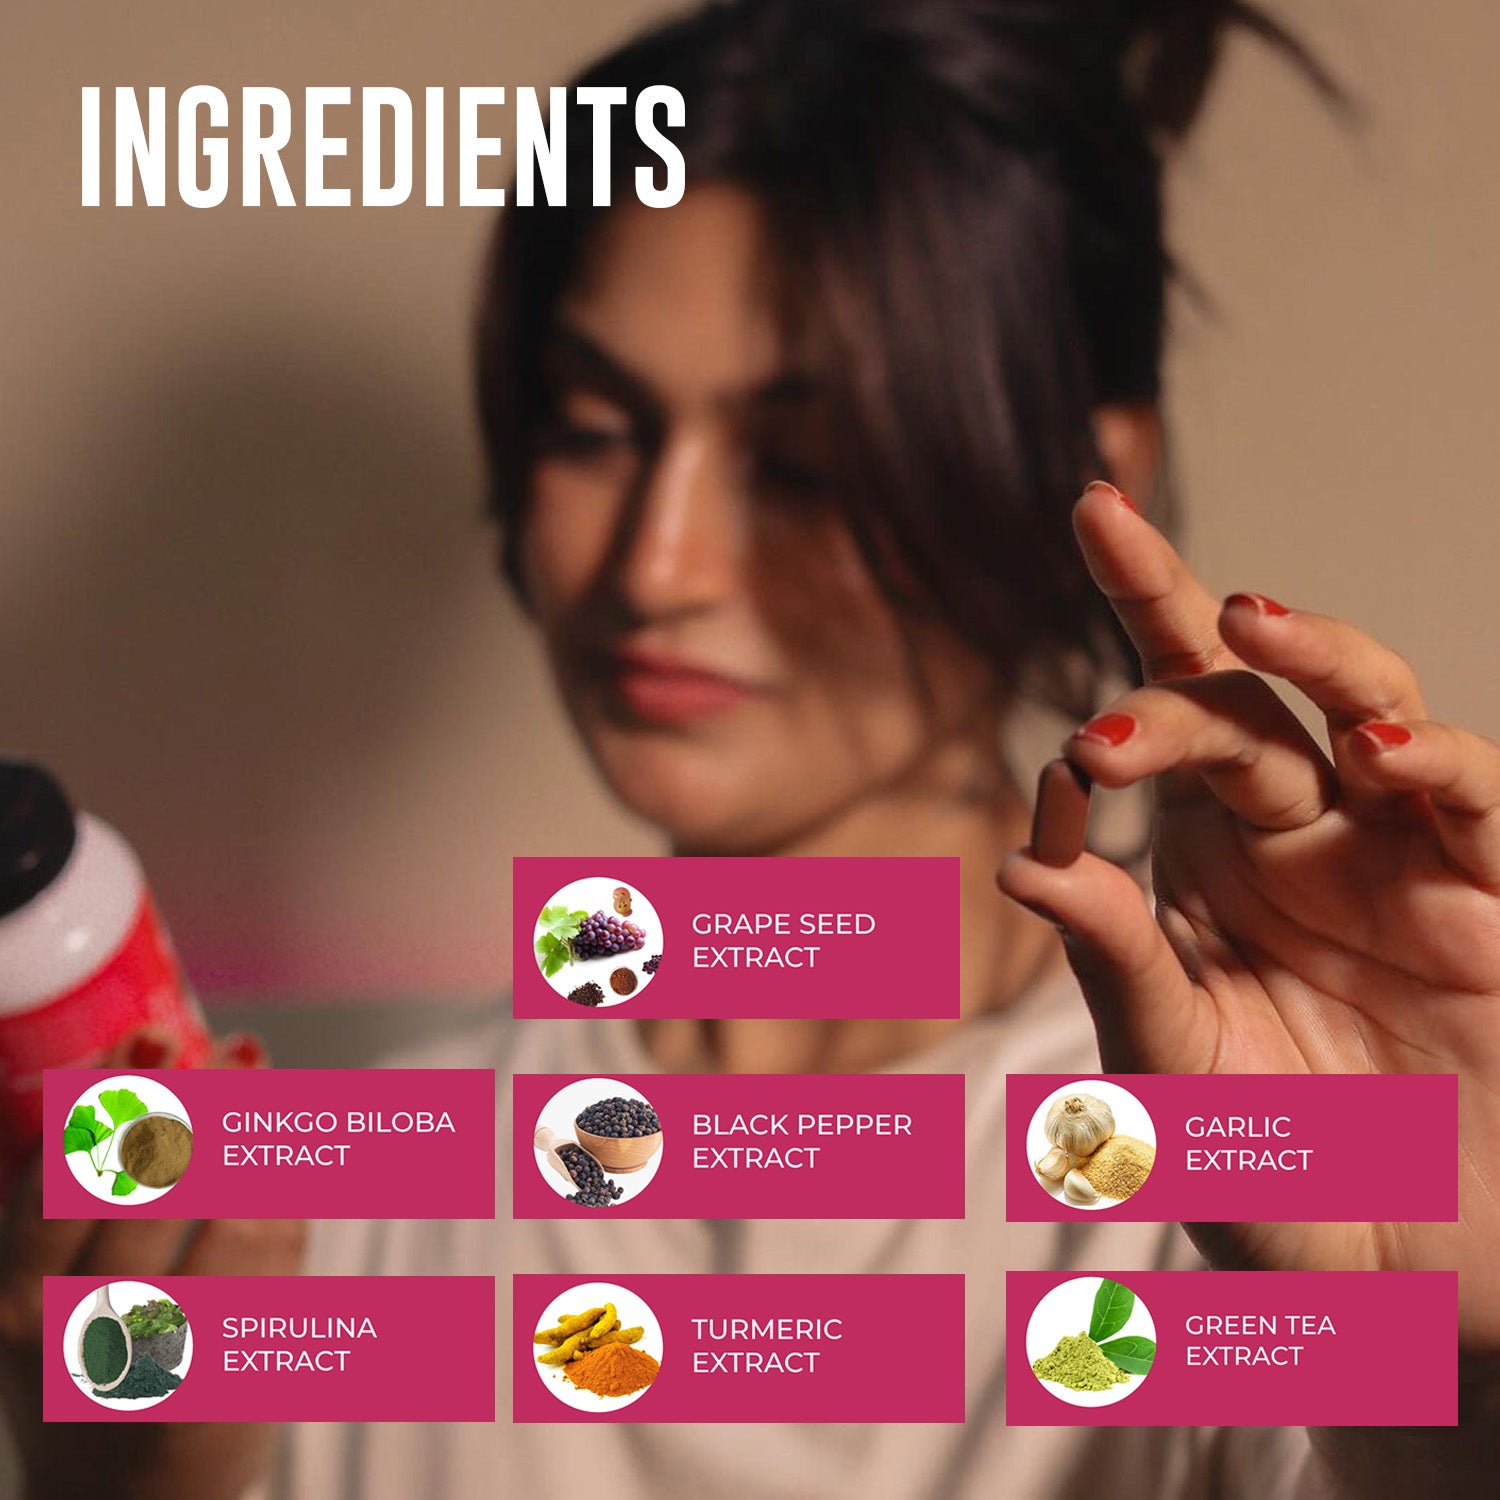 Ingredients of Daily Multivitamins for Women